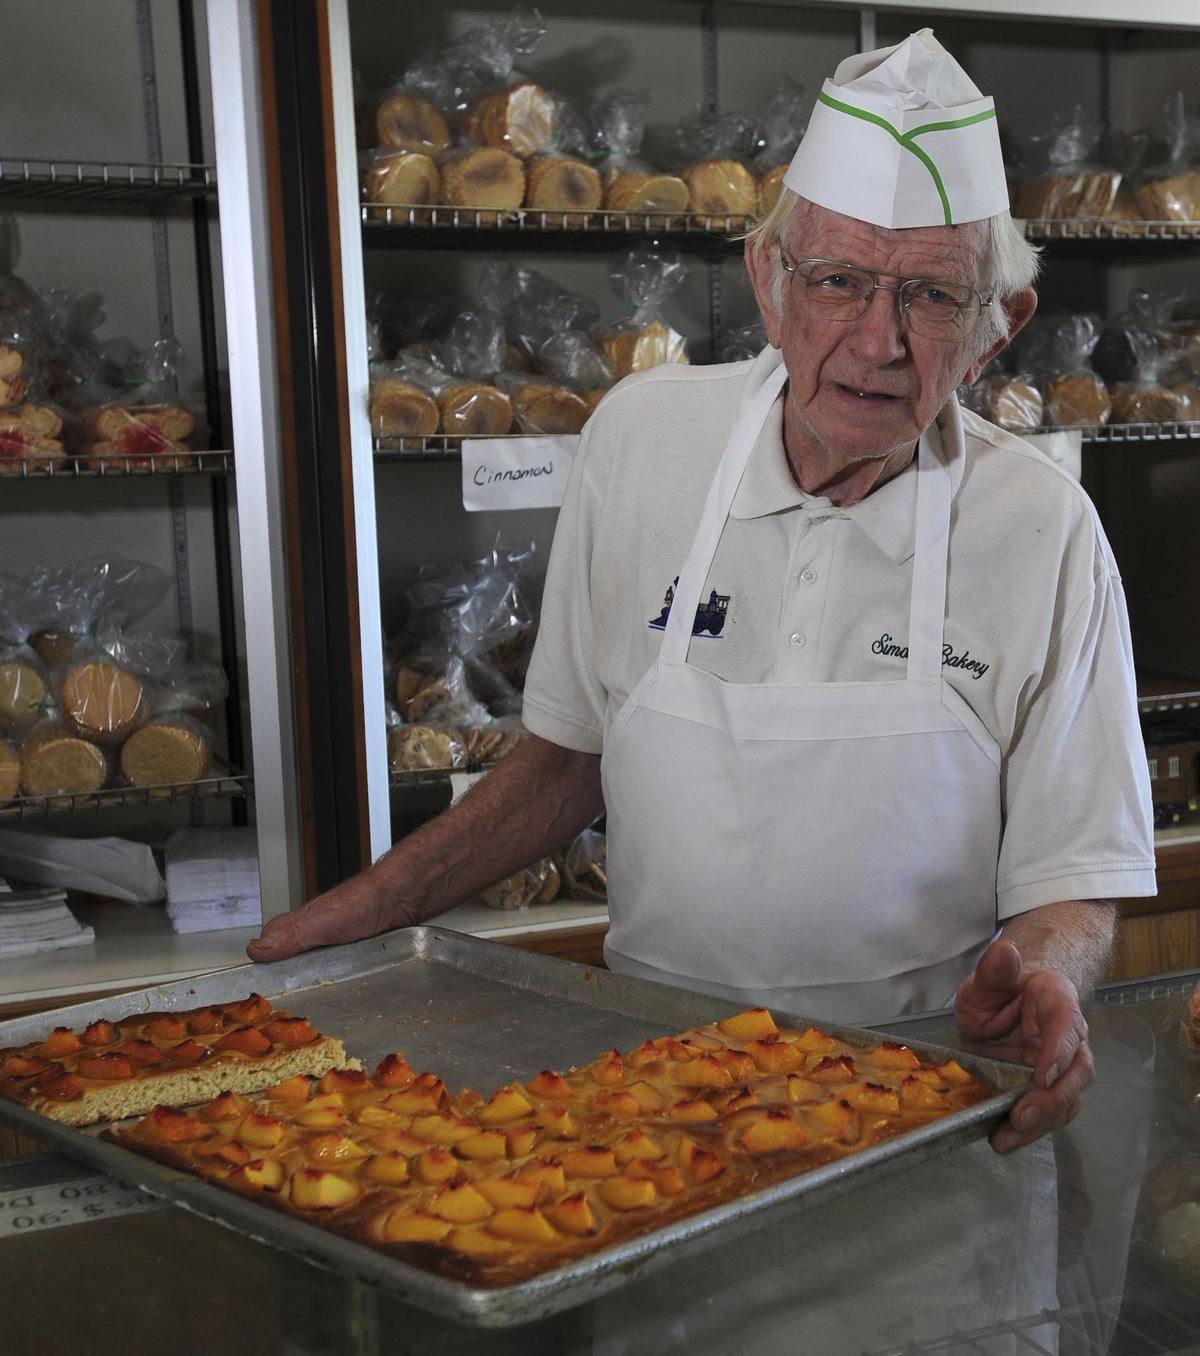 On July 29, 2014, the late George Simon made his peach cake at his bakery, Simon's Bakery, in the Cranbrook Shopping Center in Cockeysville. (Karen Jackson)